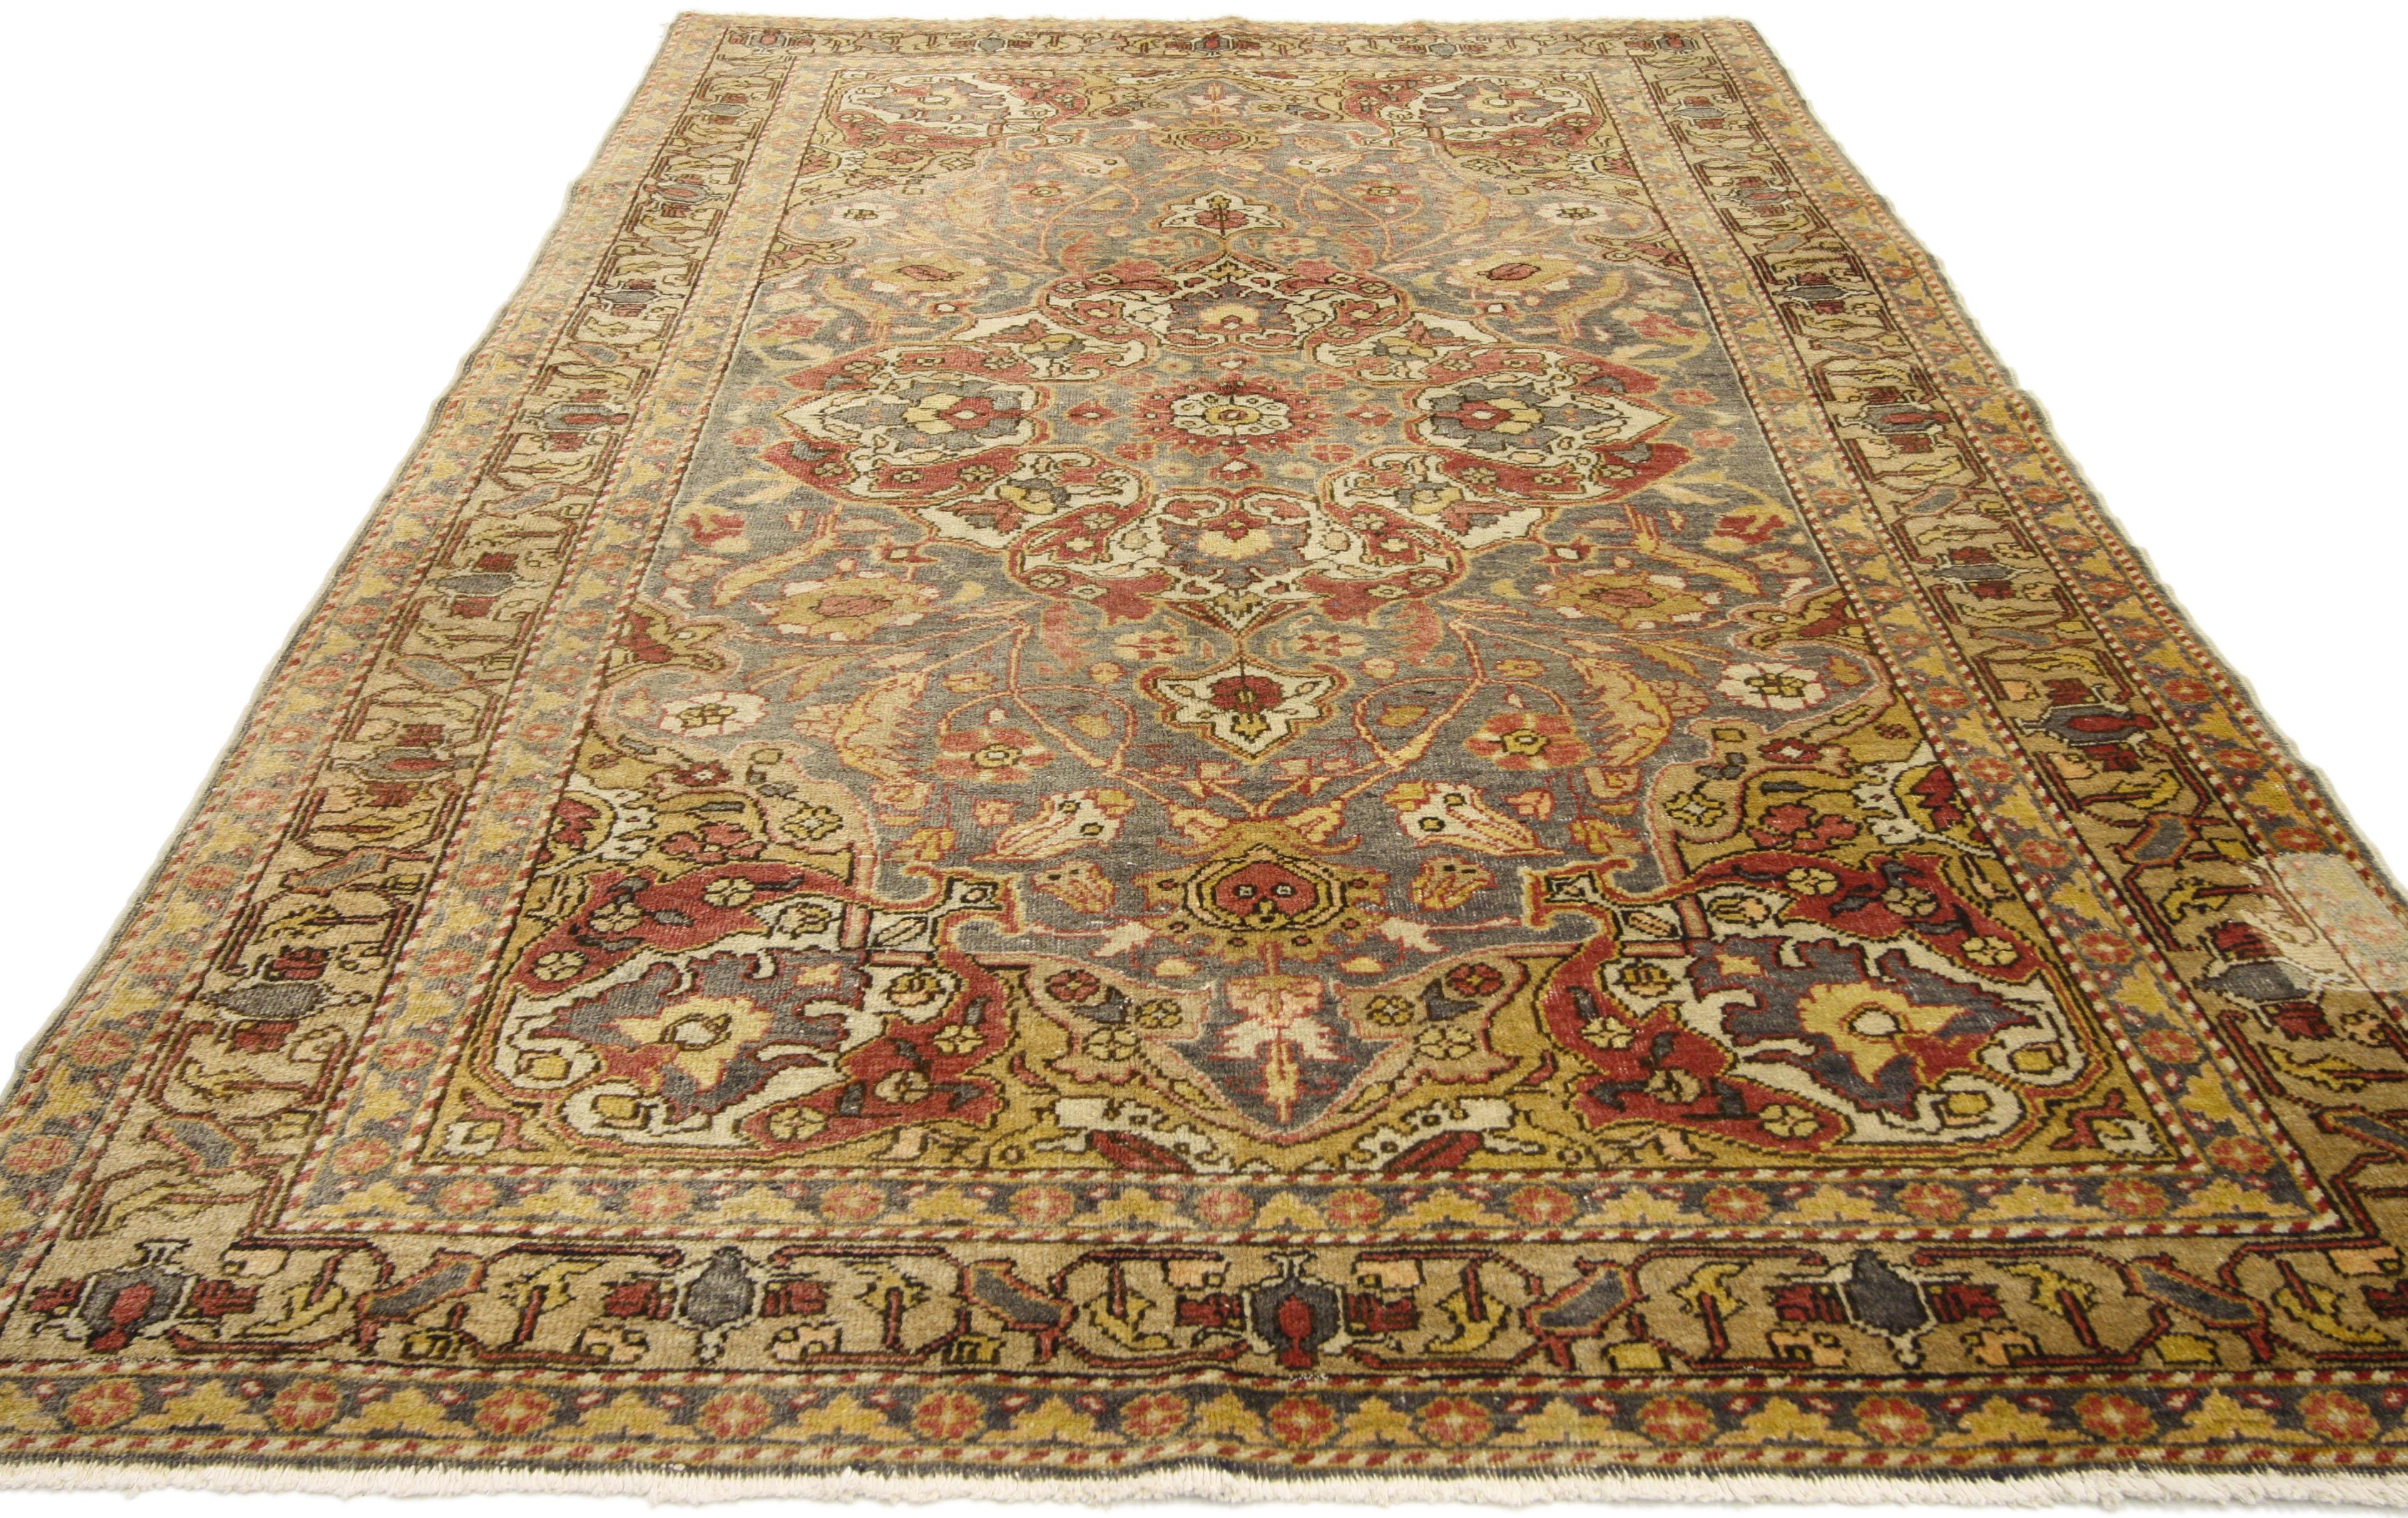 73780 Vintage Turkish Sivas rug with Rustic Cottage & Crafts style. With architectural elements of curved forms and decorative detailing, this hand knotted wool vintage Turkish Sivas rug features a rosette and palmette center medallion surrounded by